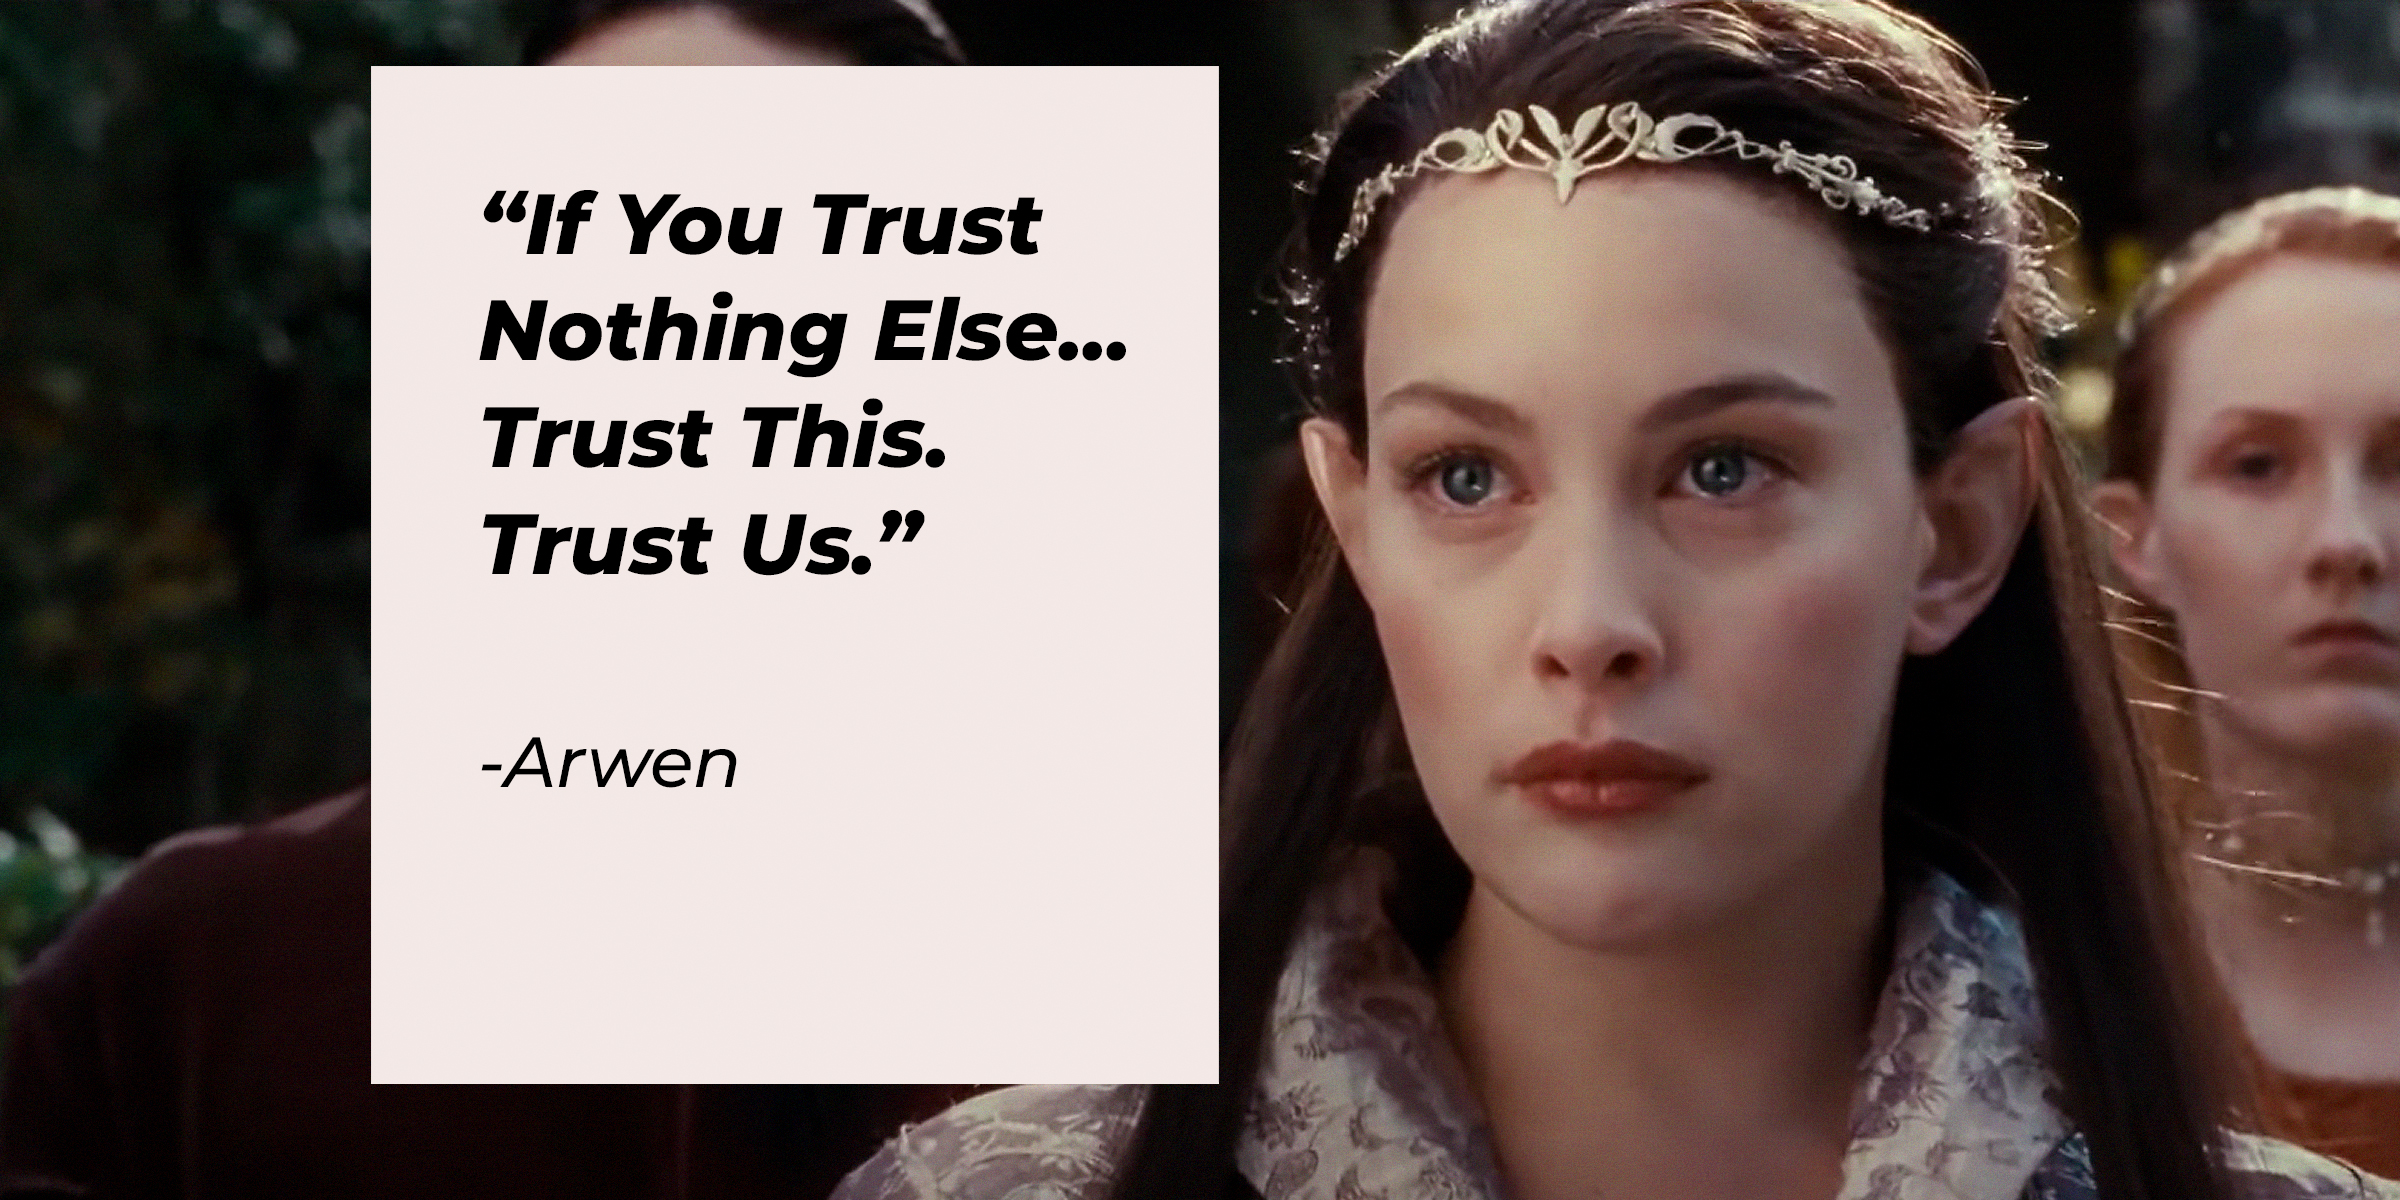 A photo of Arwen and her quote "If You Trust Nothing Else... Trust This. Trust Us." | Source: facebook.com/lordoftheringstrilogy